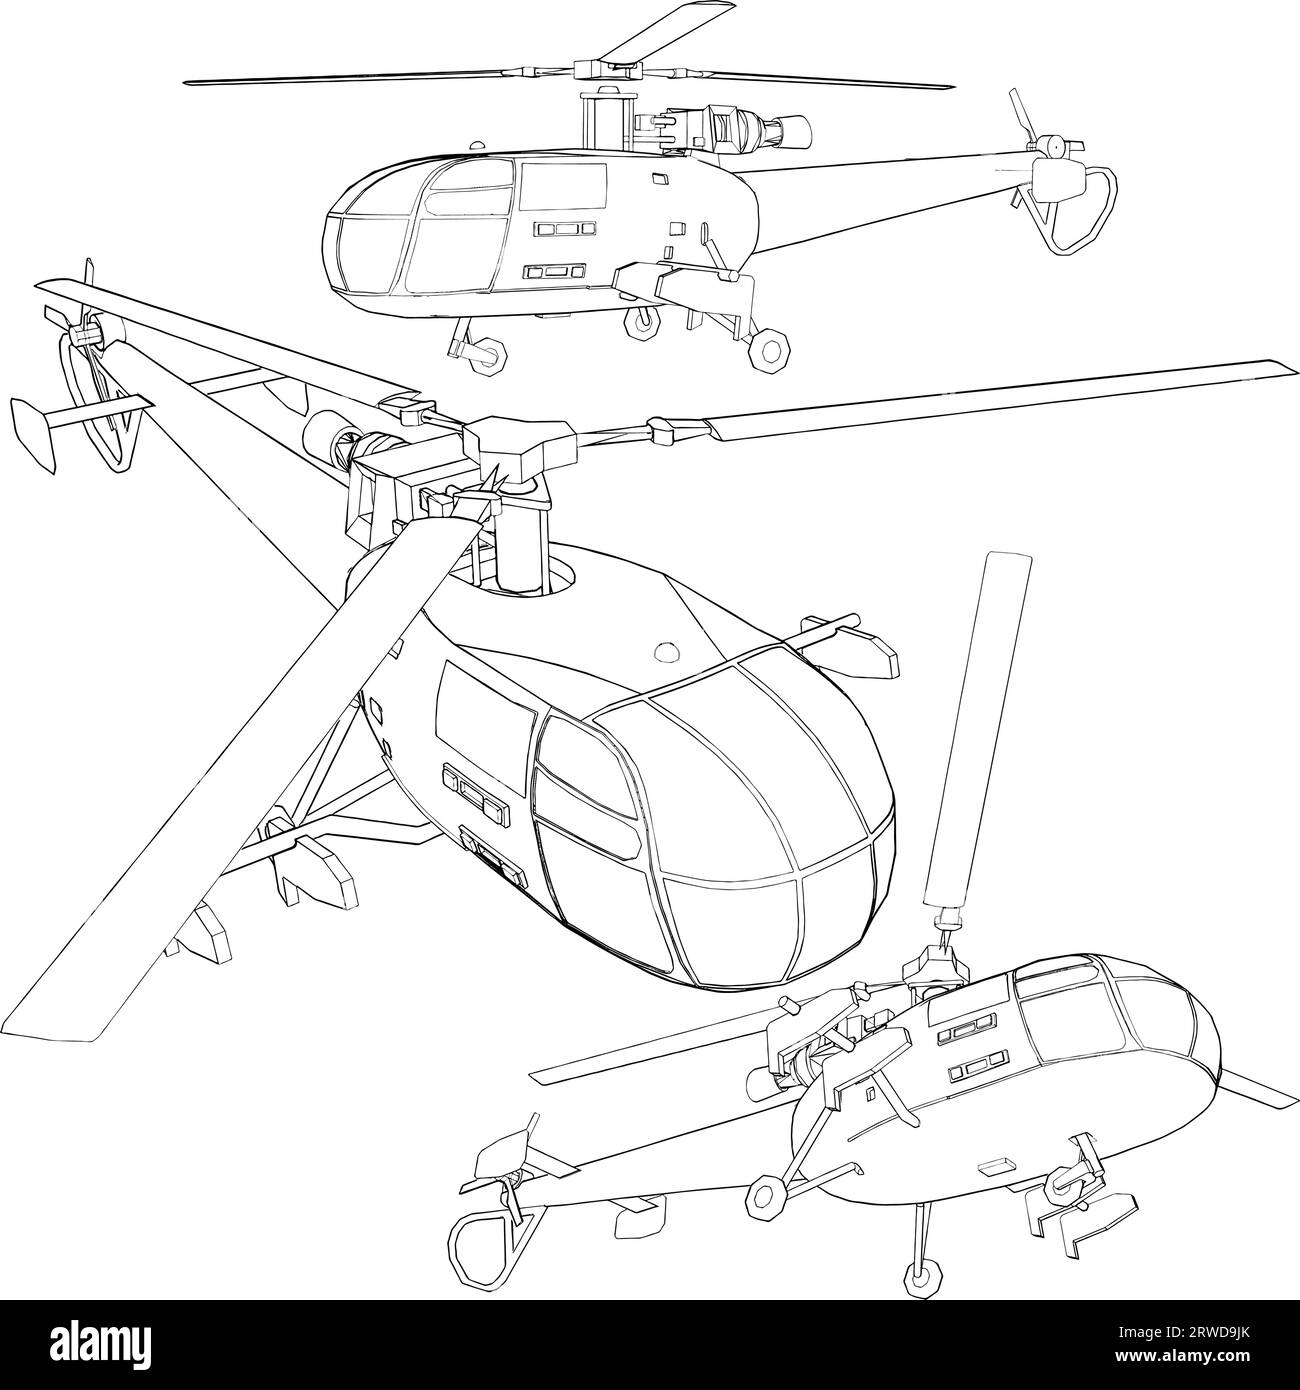 Military Helicopter Vector. Illustration Isolated On White Background. A vector illustration Of A Military Aircraft. Stock Vector